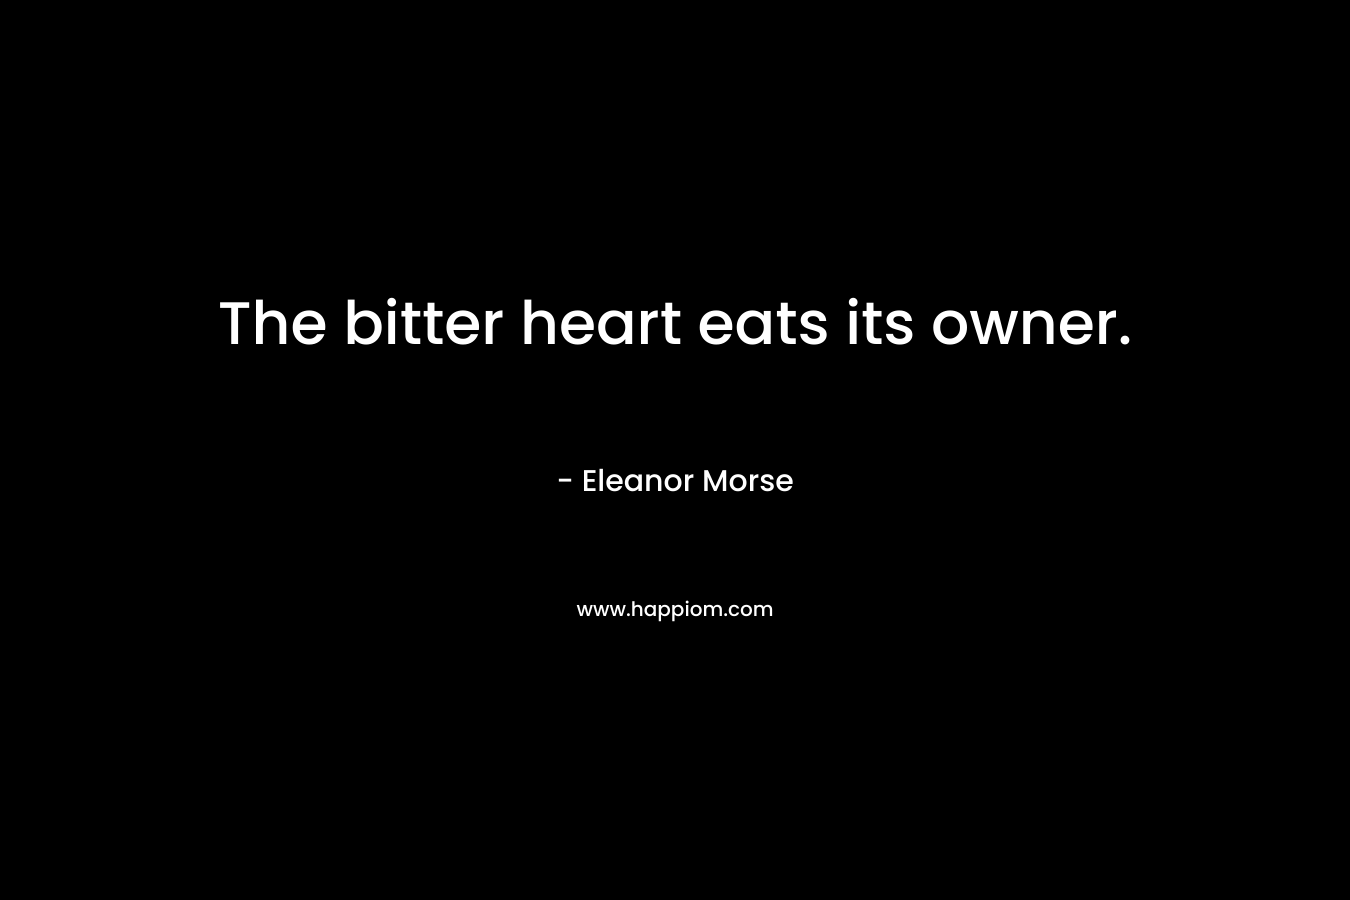 The bitter heart eats its owner.